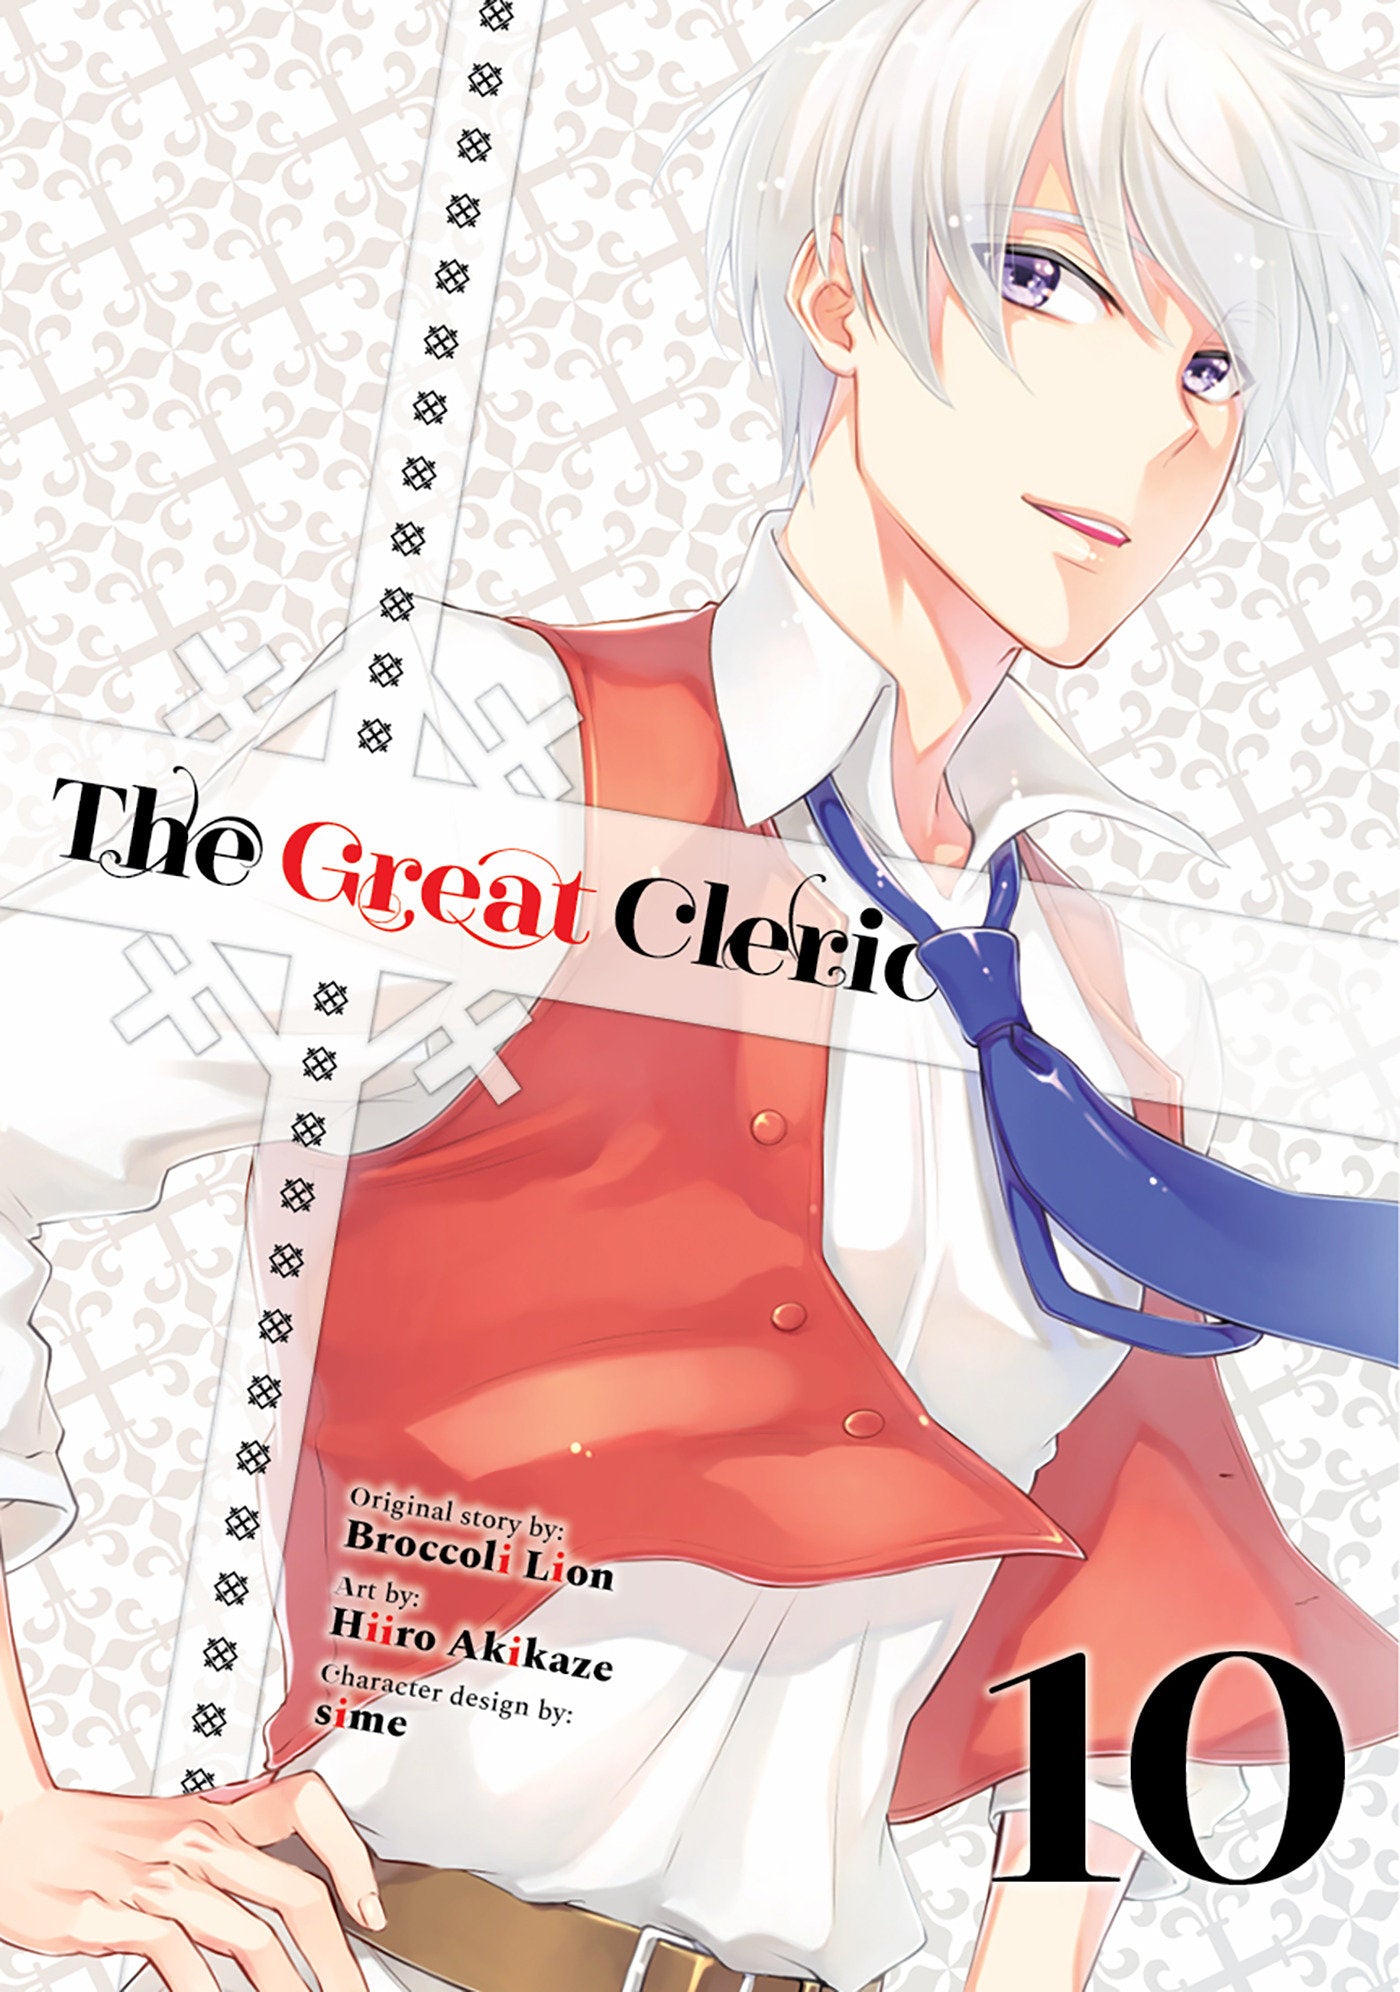 THE GREAT CLERIC 10 (7/31/24) PRESALE